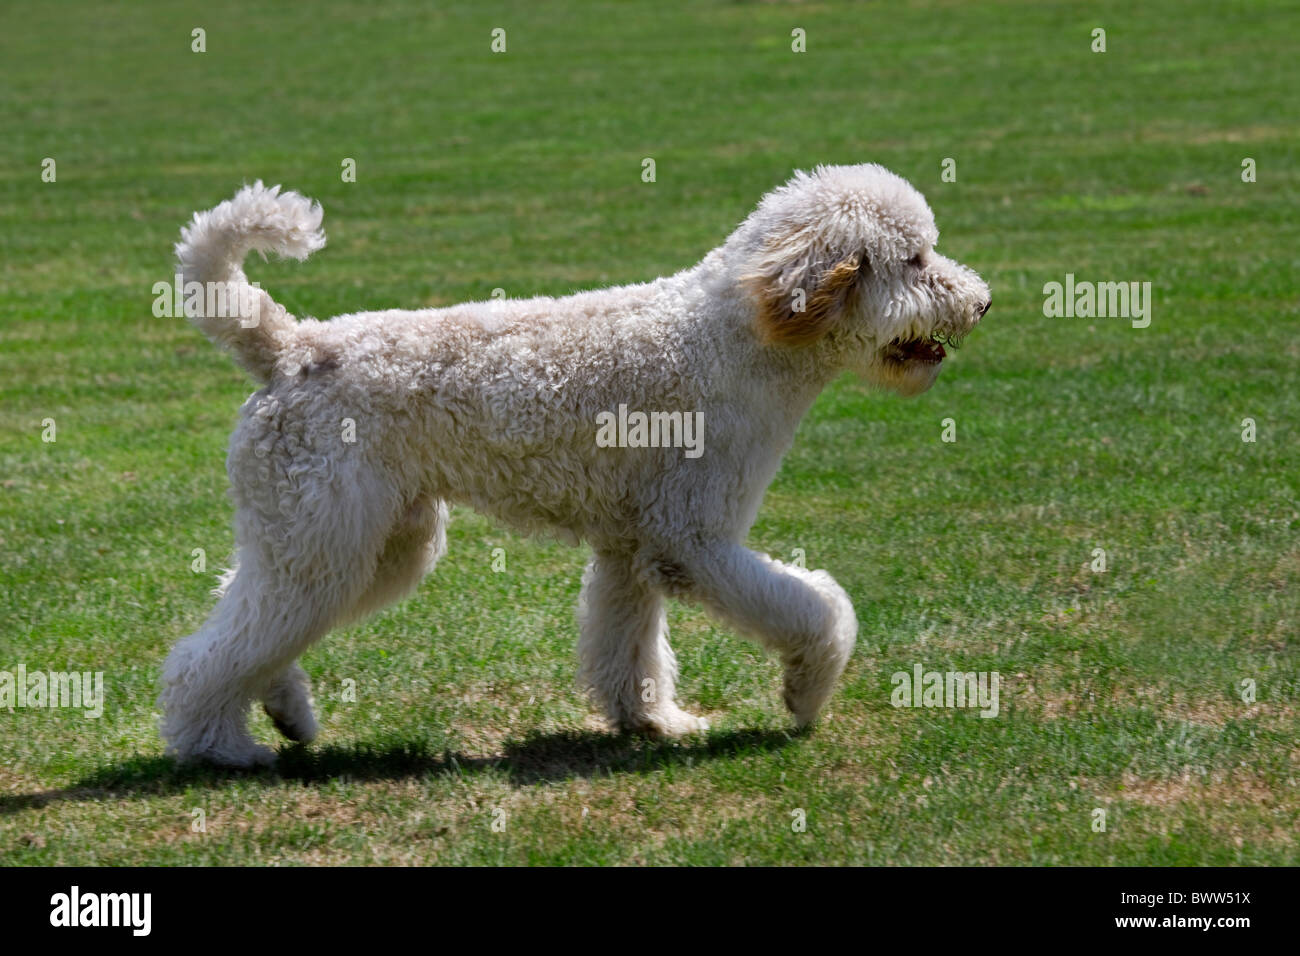 Standard poodle (Canis lupus familiaris) in garden Stock Photo